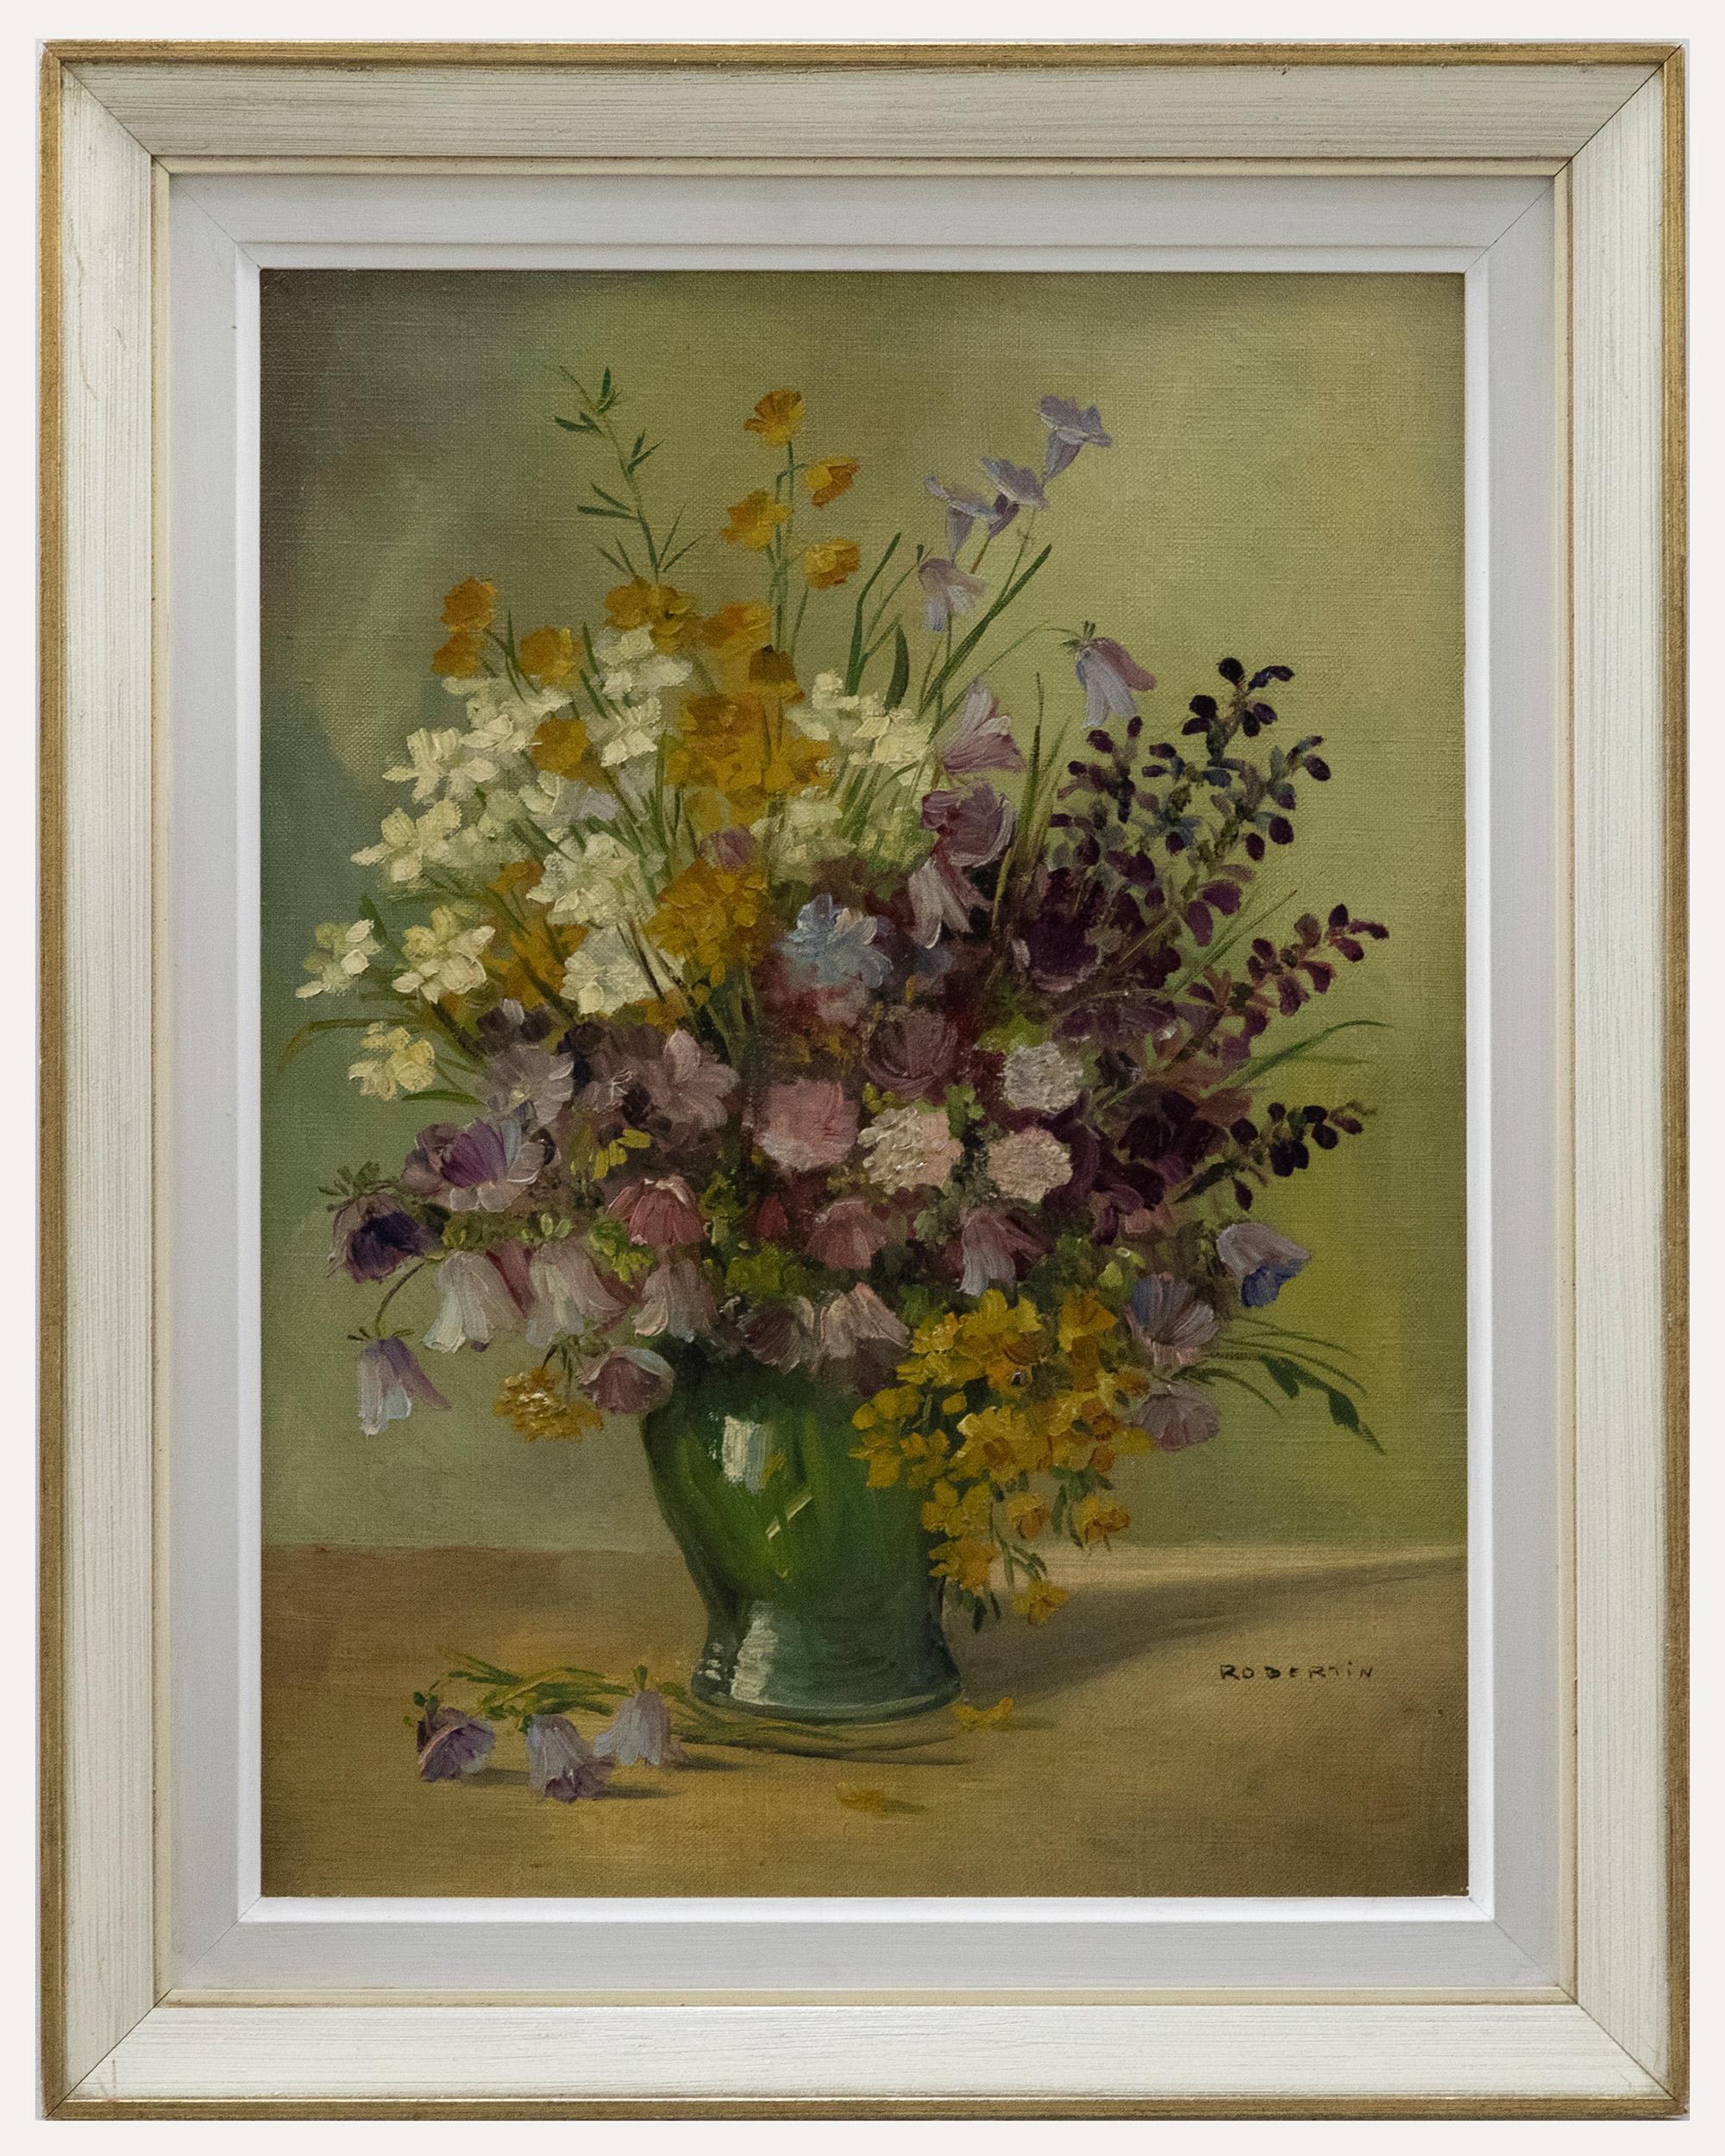 Unknown Still-Life Painting - Robertin - 20th Century Oil, Spring Posey in a Green Vase